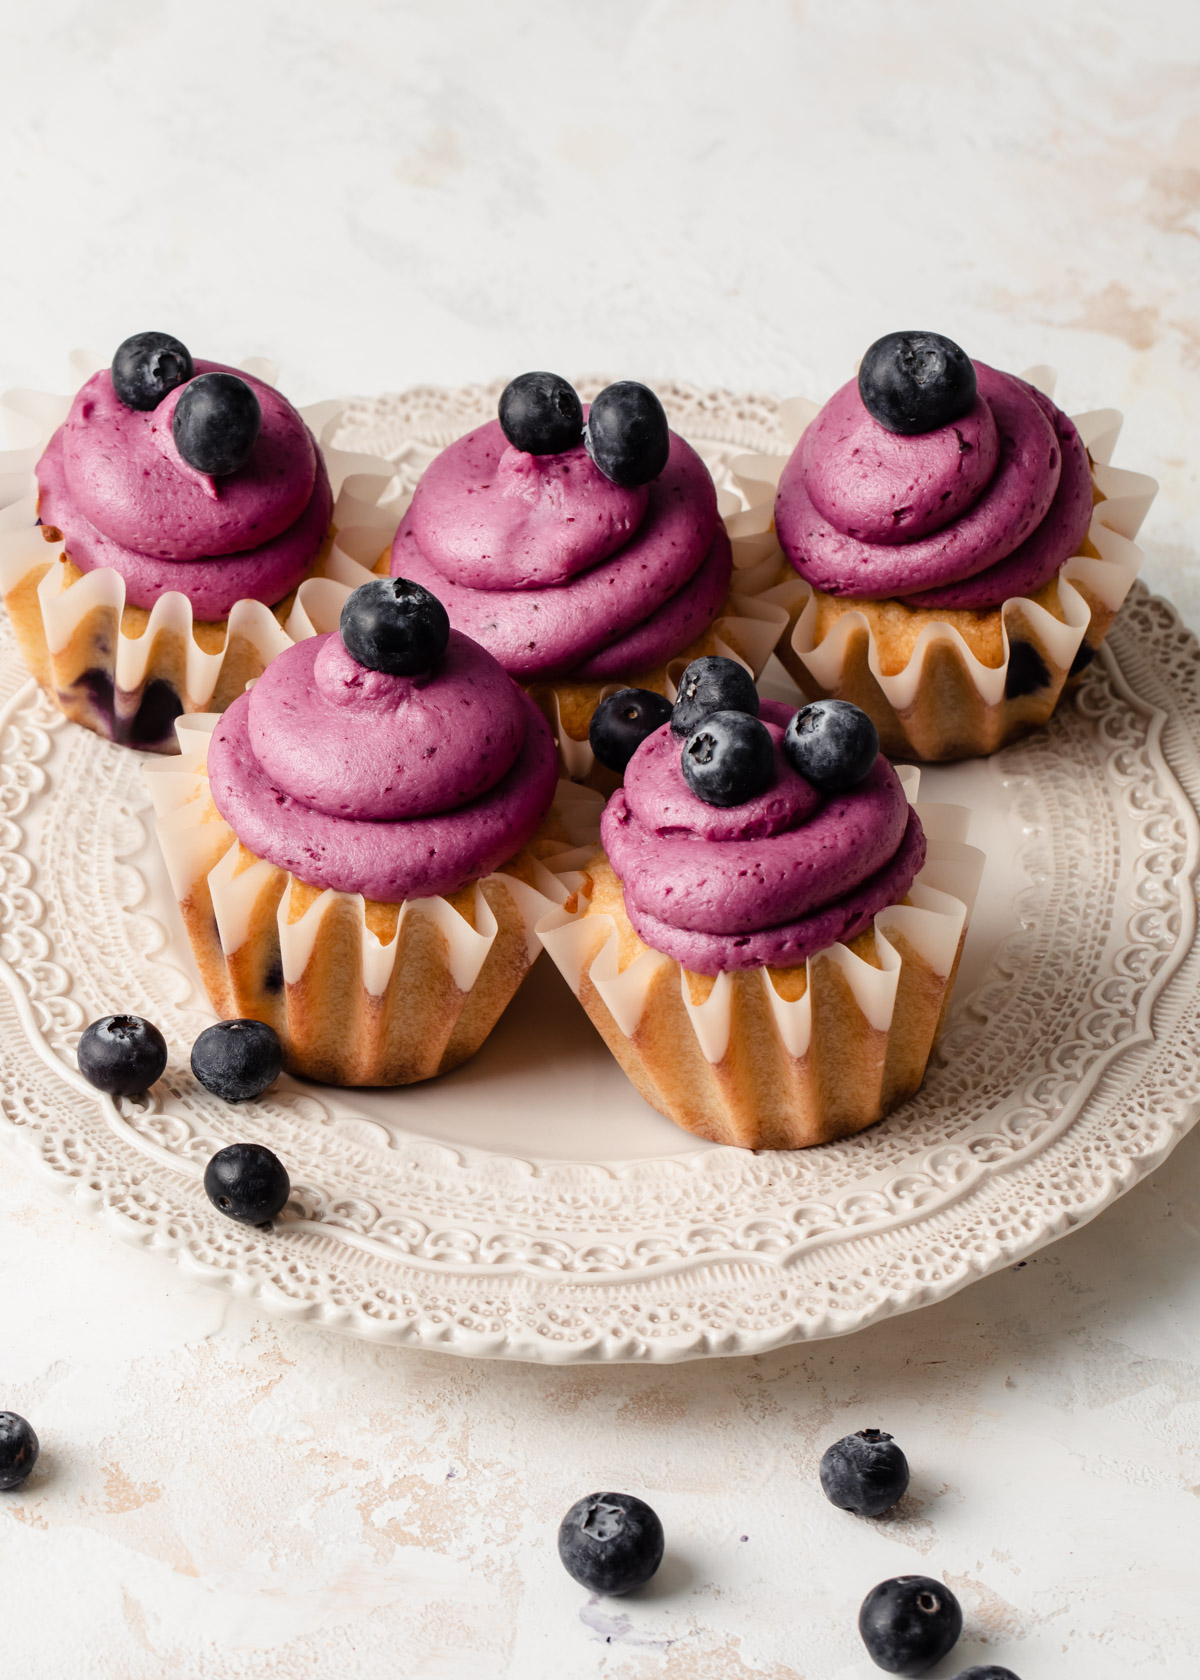 A plater of cupcakes with purple blueberry buttercream swirled on top and fresh blueberries